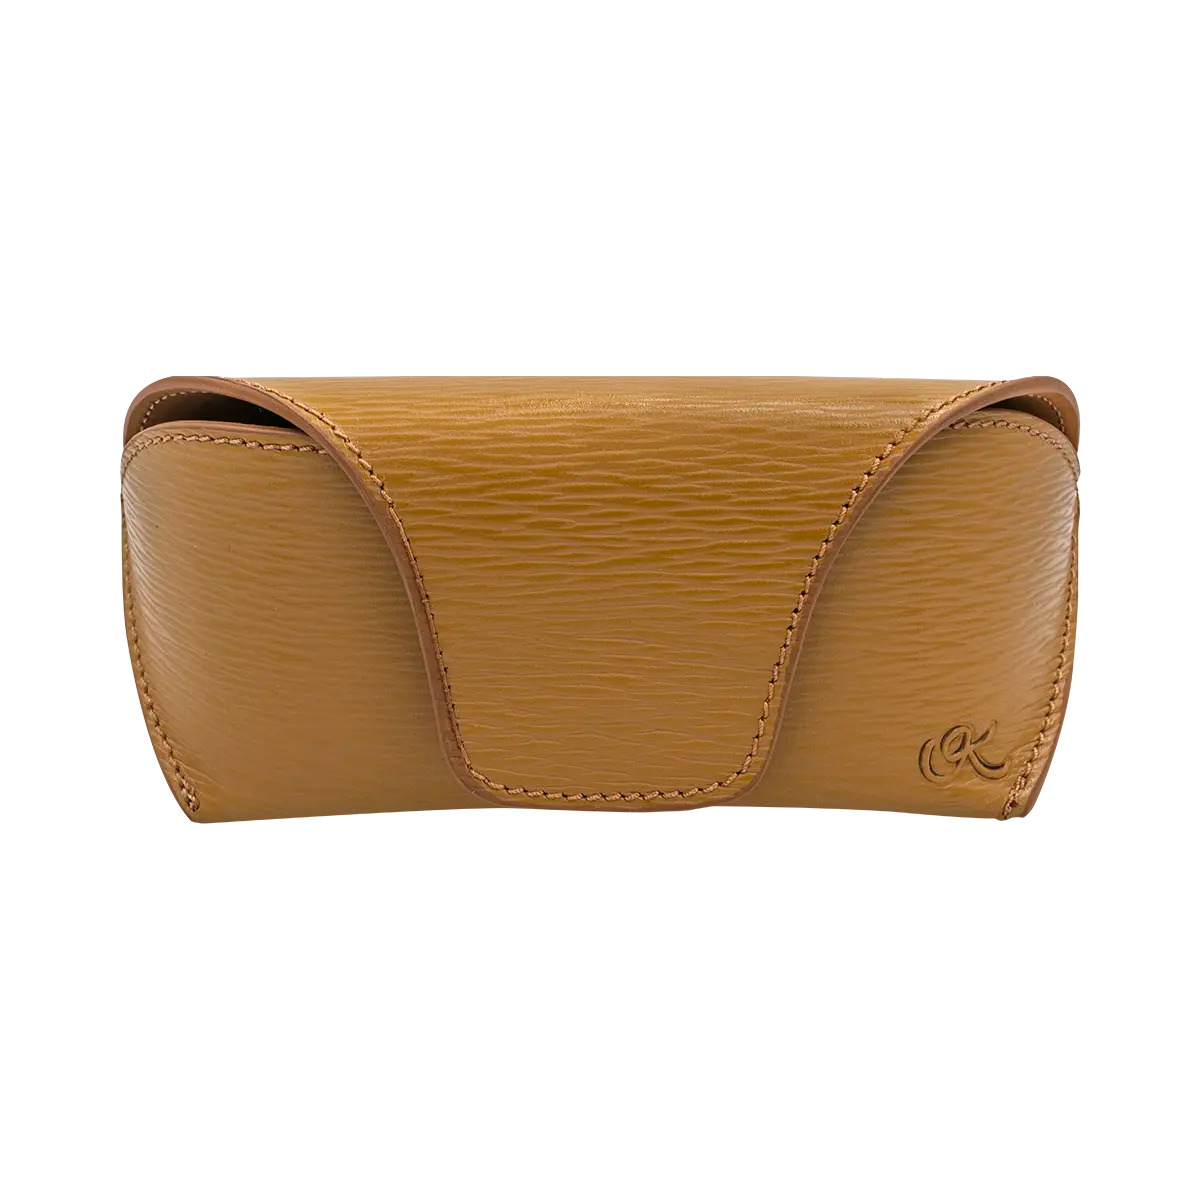 tan leather sunglasses case for women. Shop now in San Diego, CA.